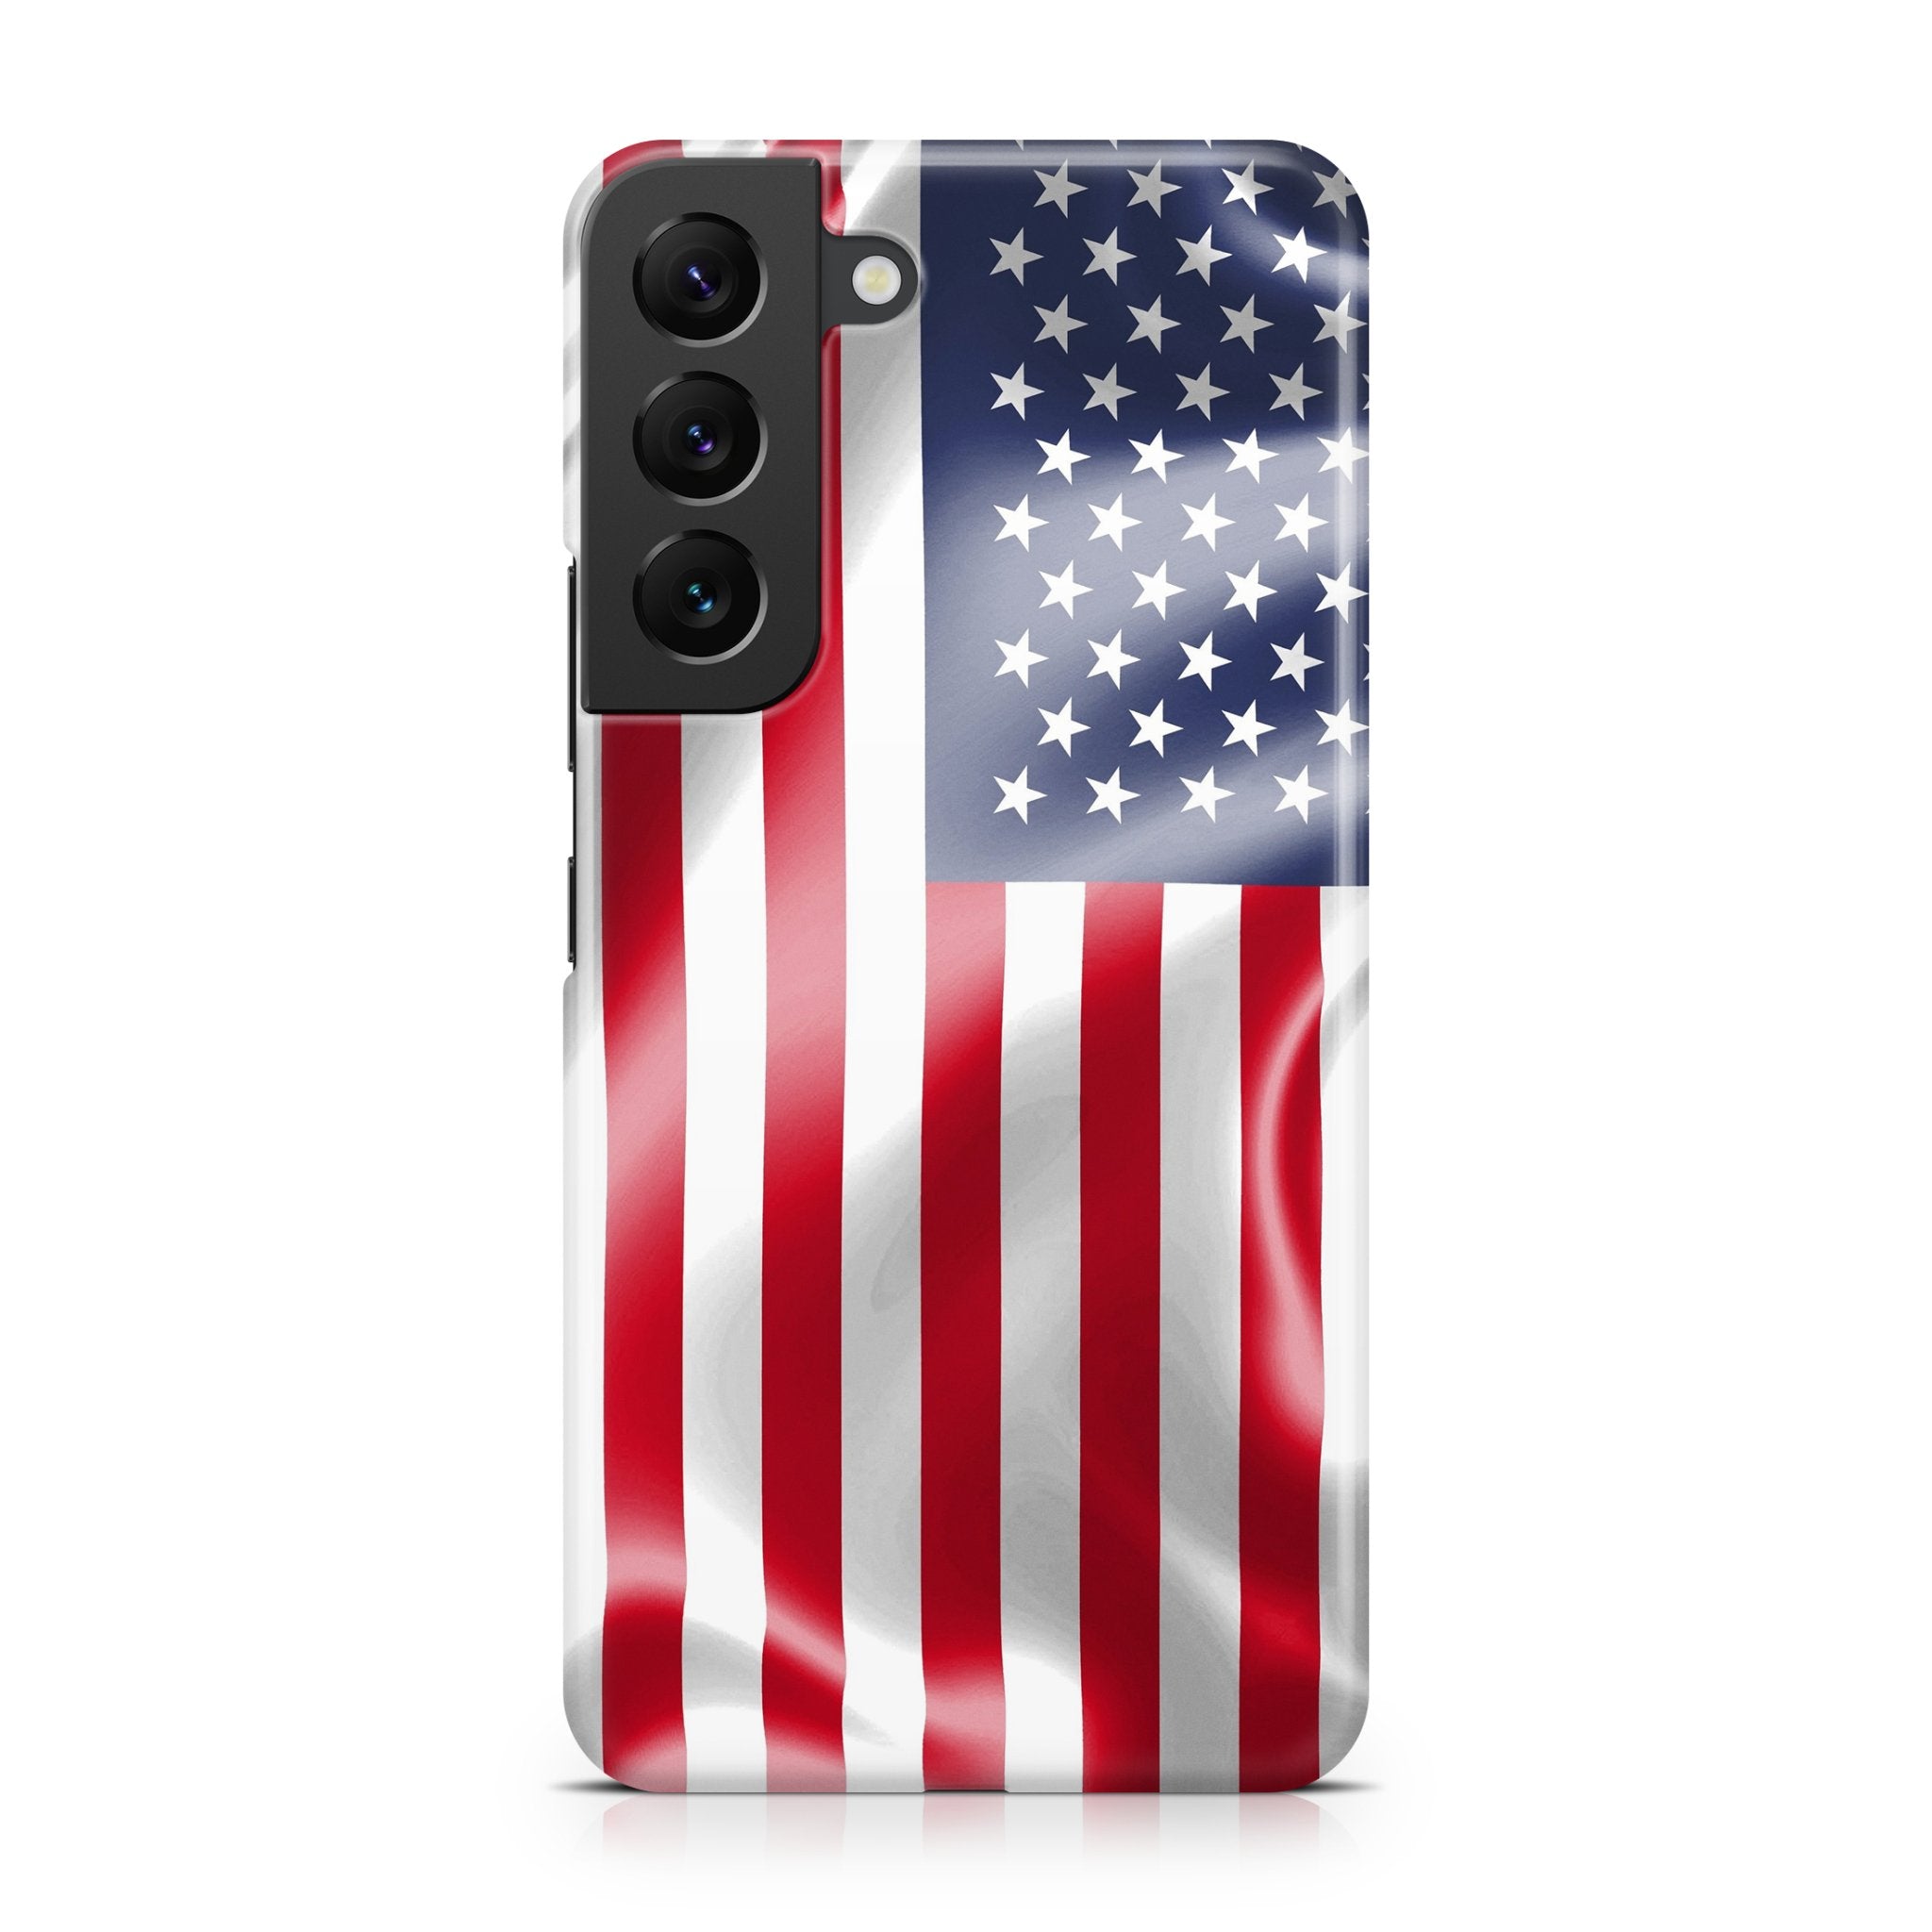 Waving American Flag - Samsung phone case designs by CaseSwagger